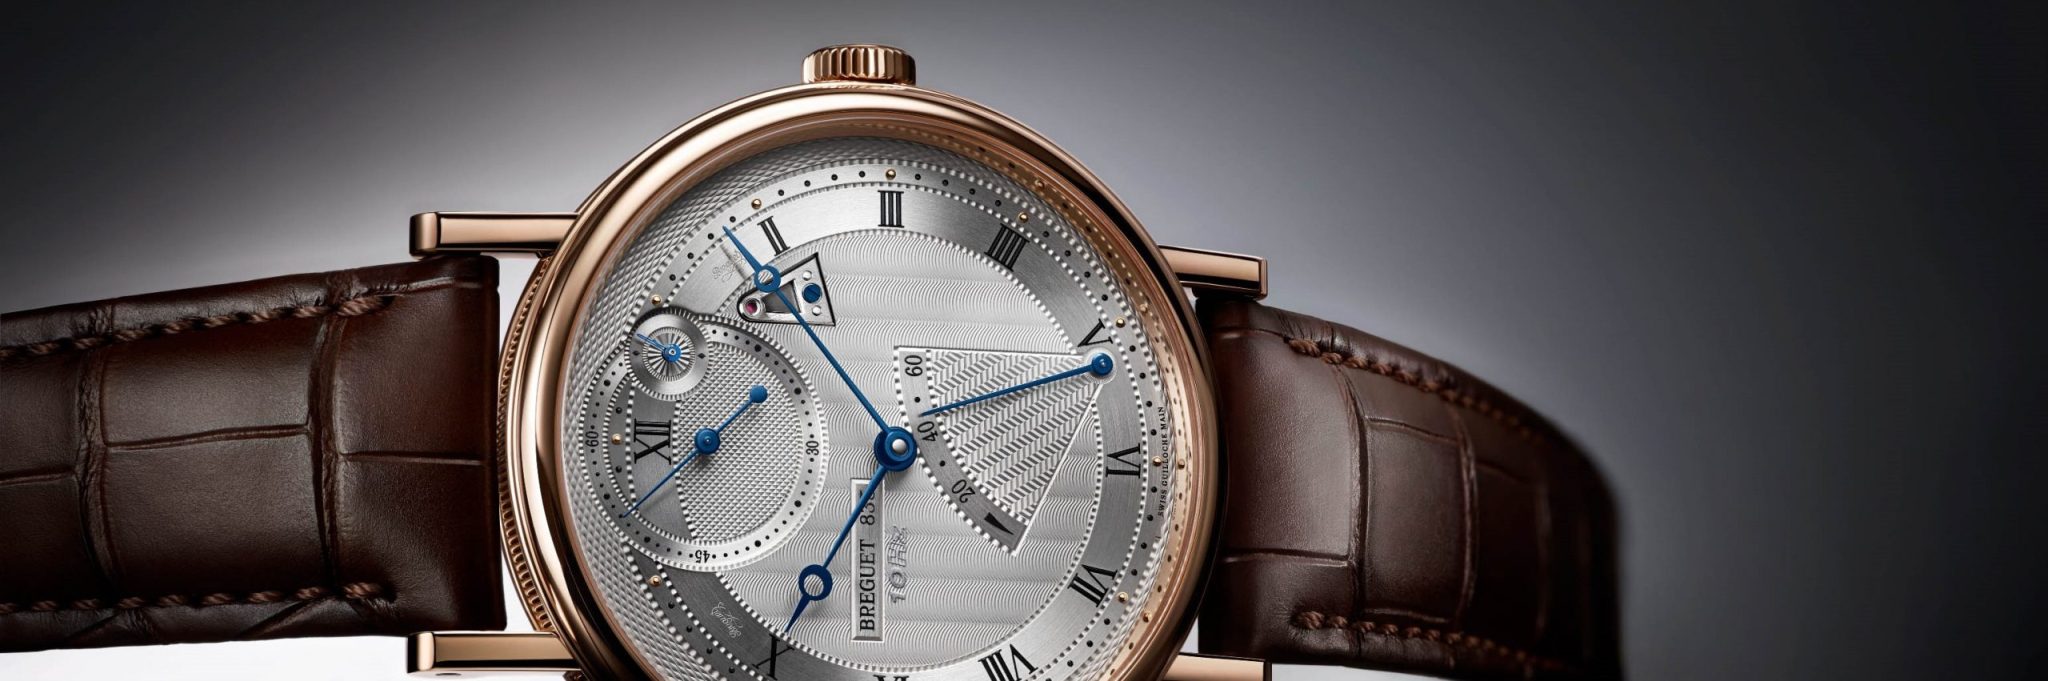 Guilloche Finishing, The Art of Dial